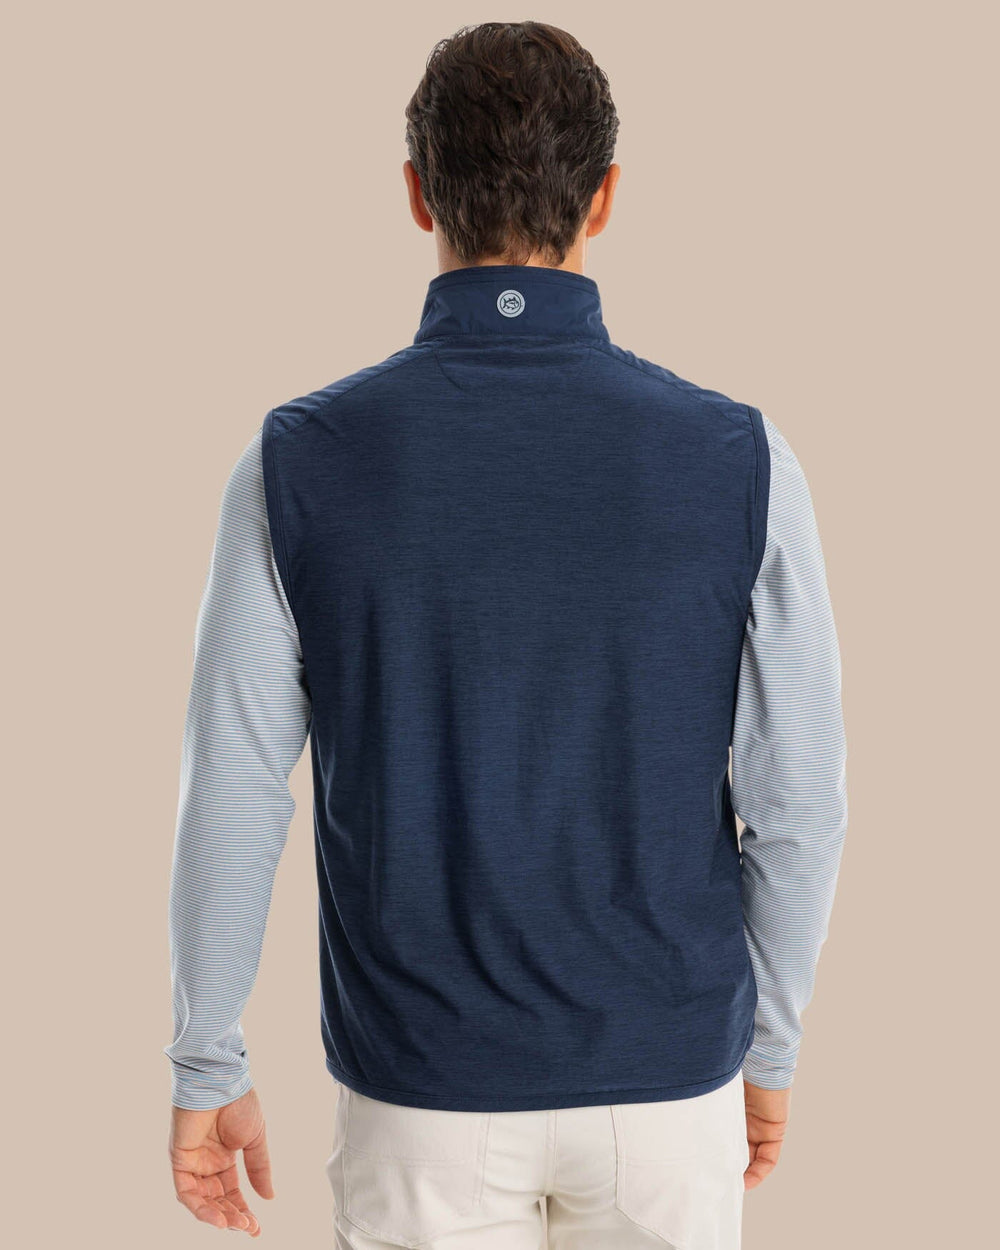 The model back view of the Men's Abercorn Performance Vest by Southern Tide - True Navy